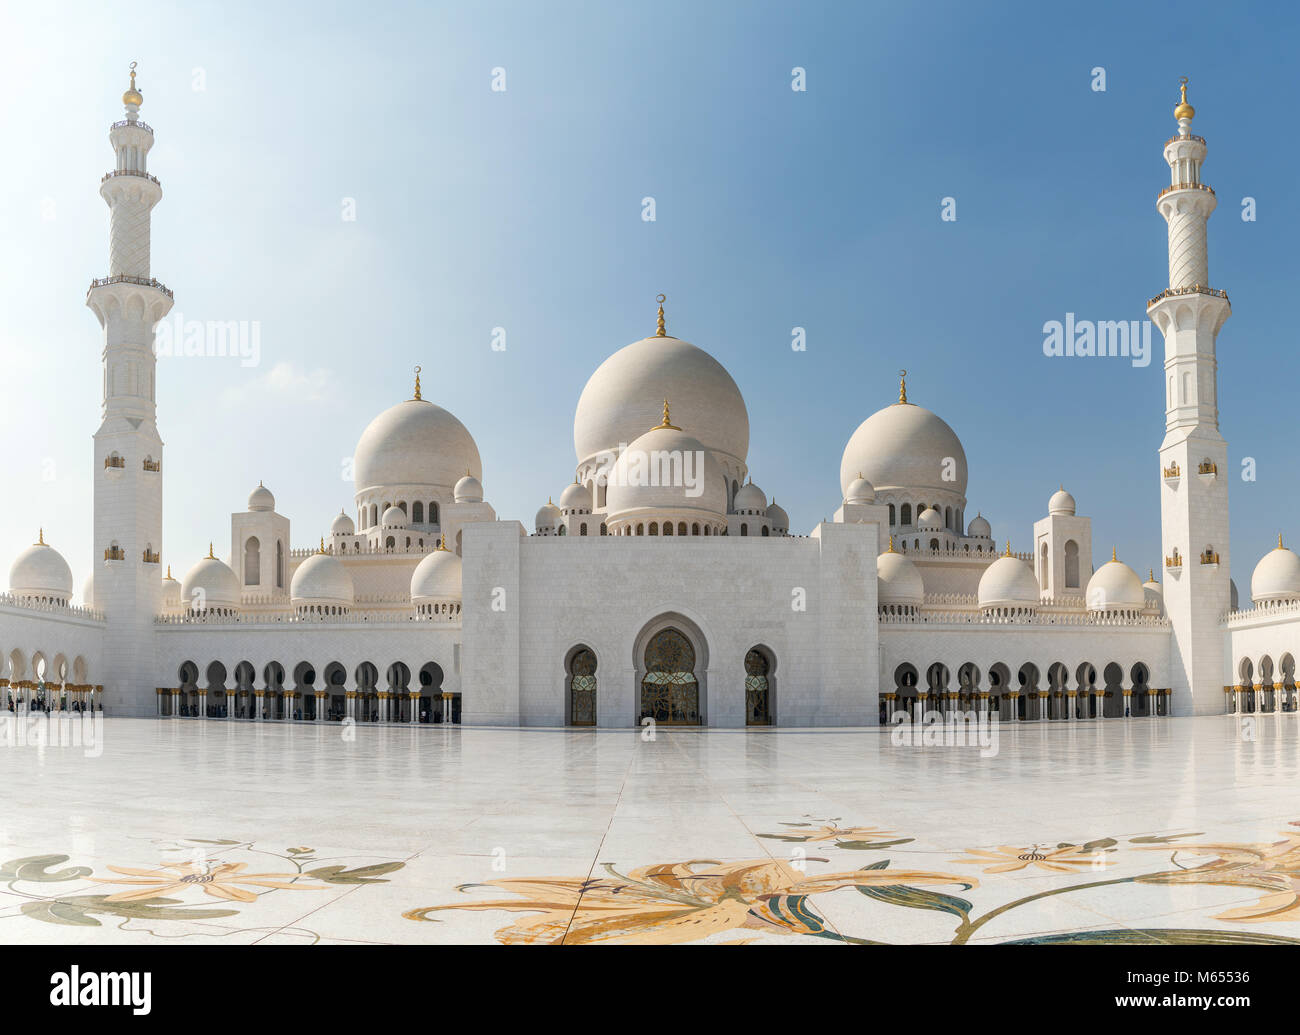 Grand Mosque - Architectural work of art is one of the world’s largest mosques, with a capacity for an astonishing 40,000 worshippers. Stock Photo